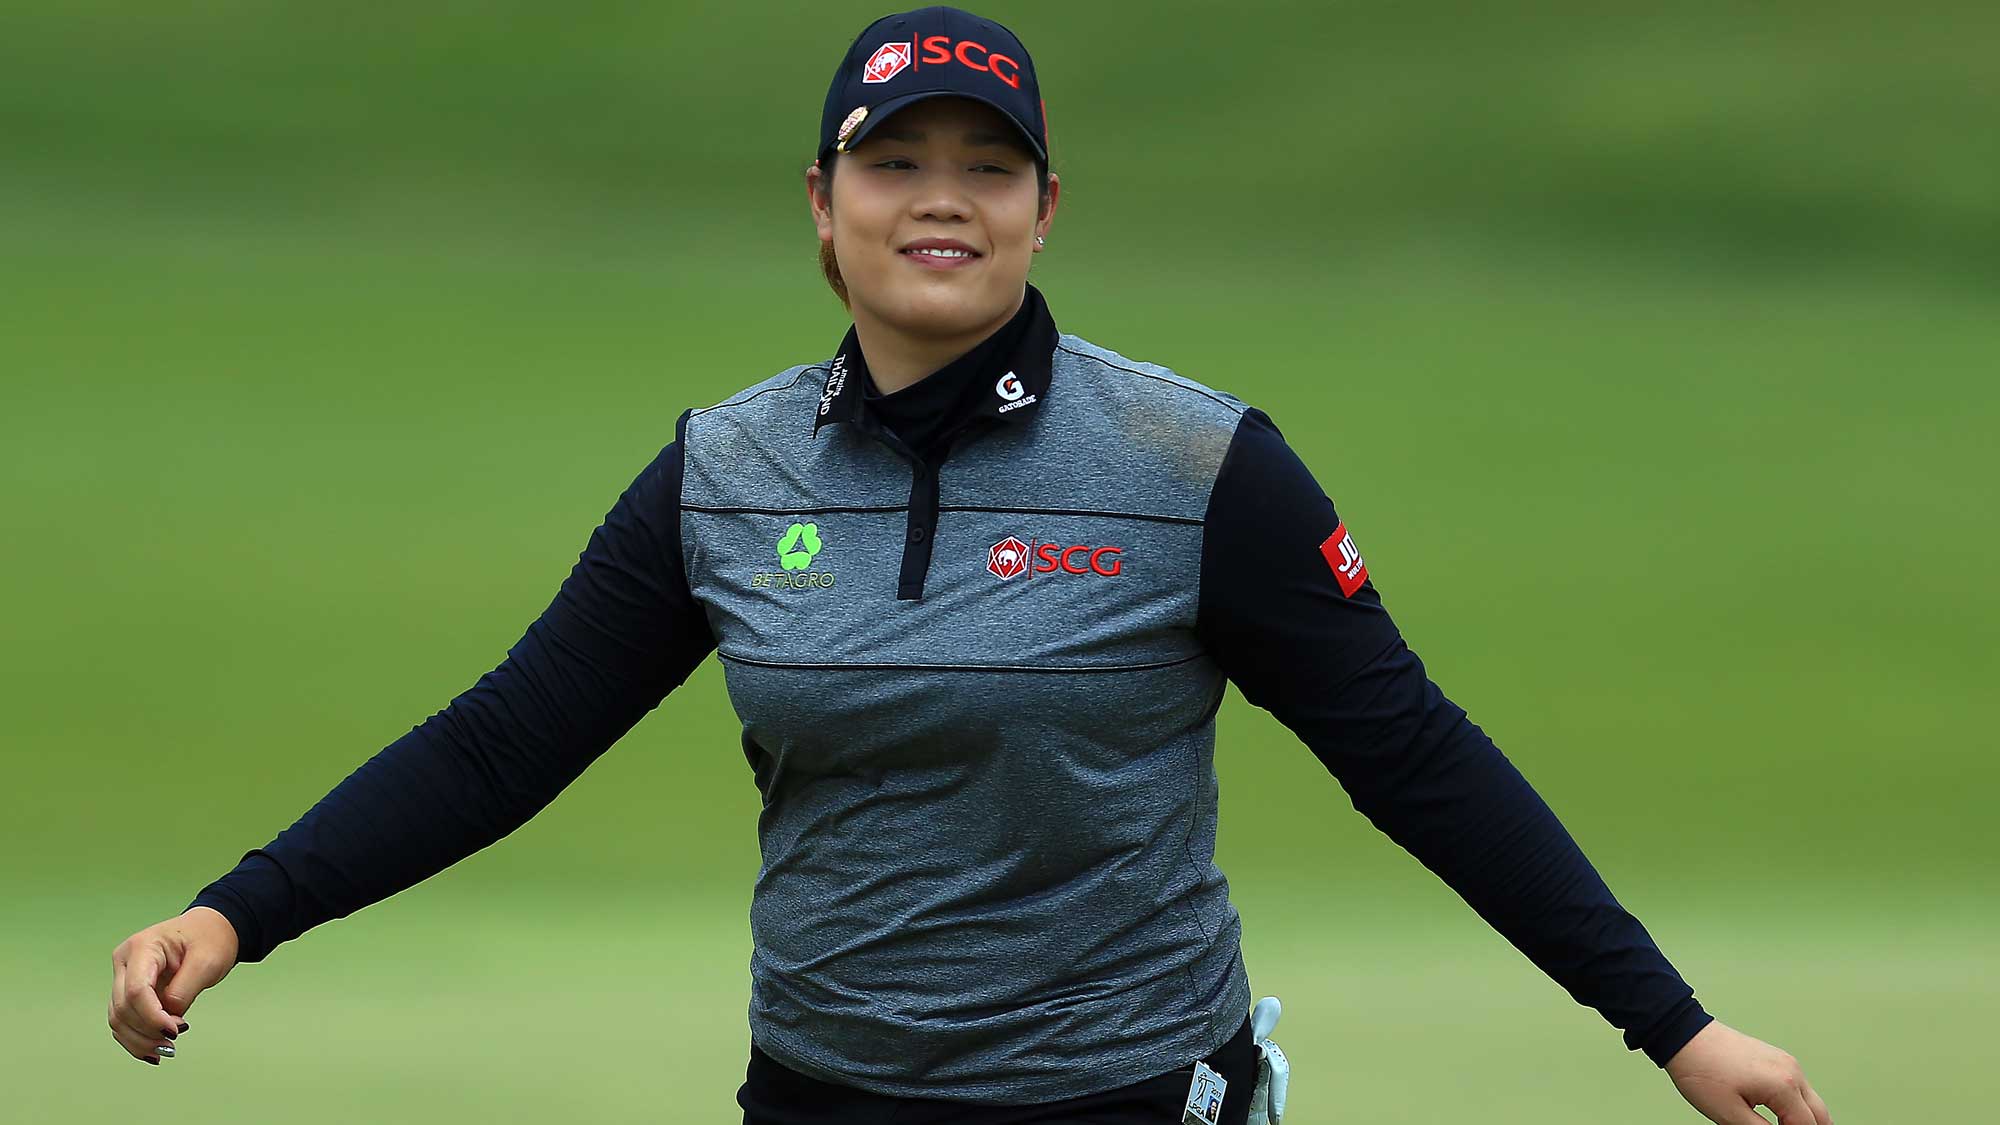 Ariya Jutanugarn of Thailand smiles after sinking her putt on the 1st green during the final round of the Manulife LPGA Classic